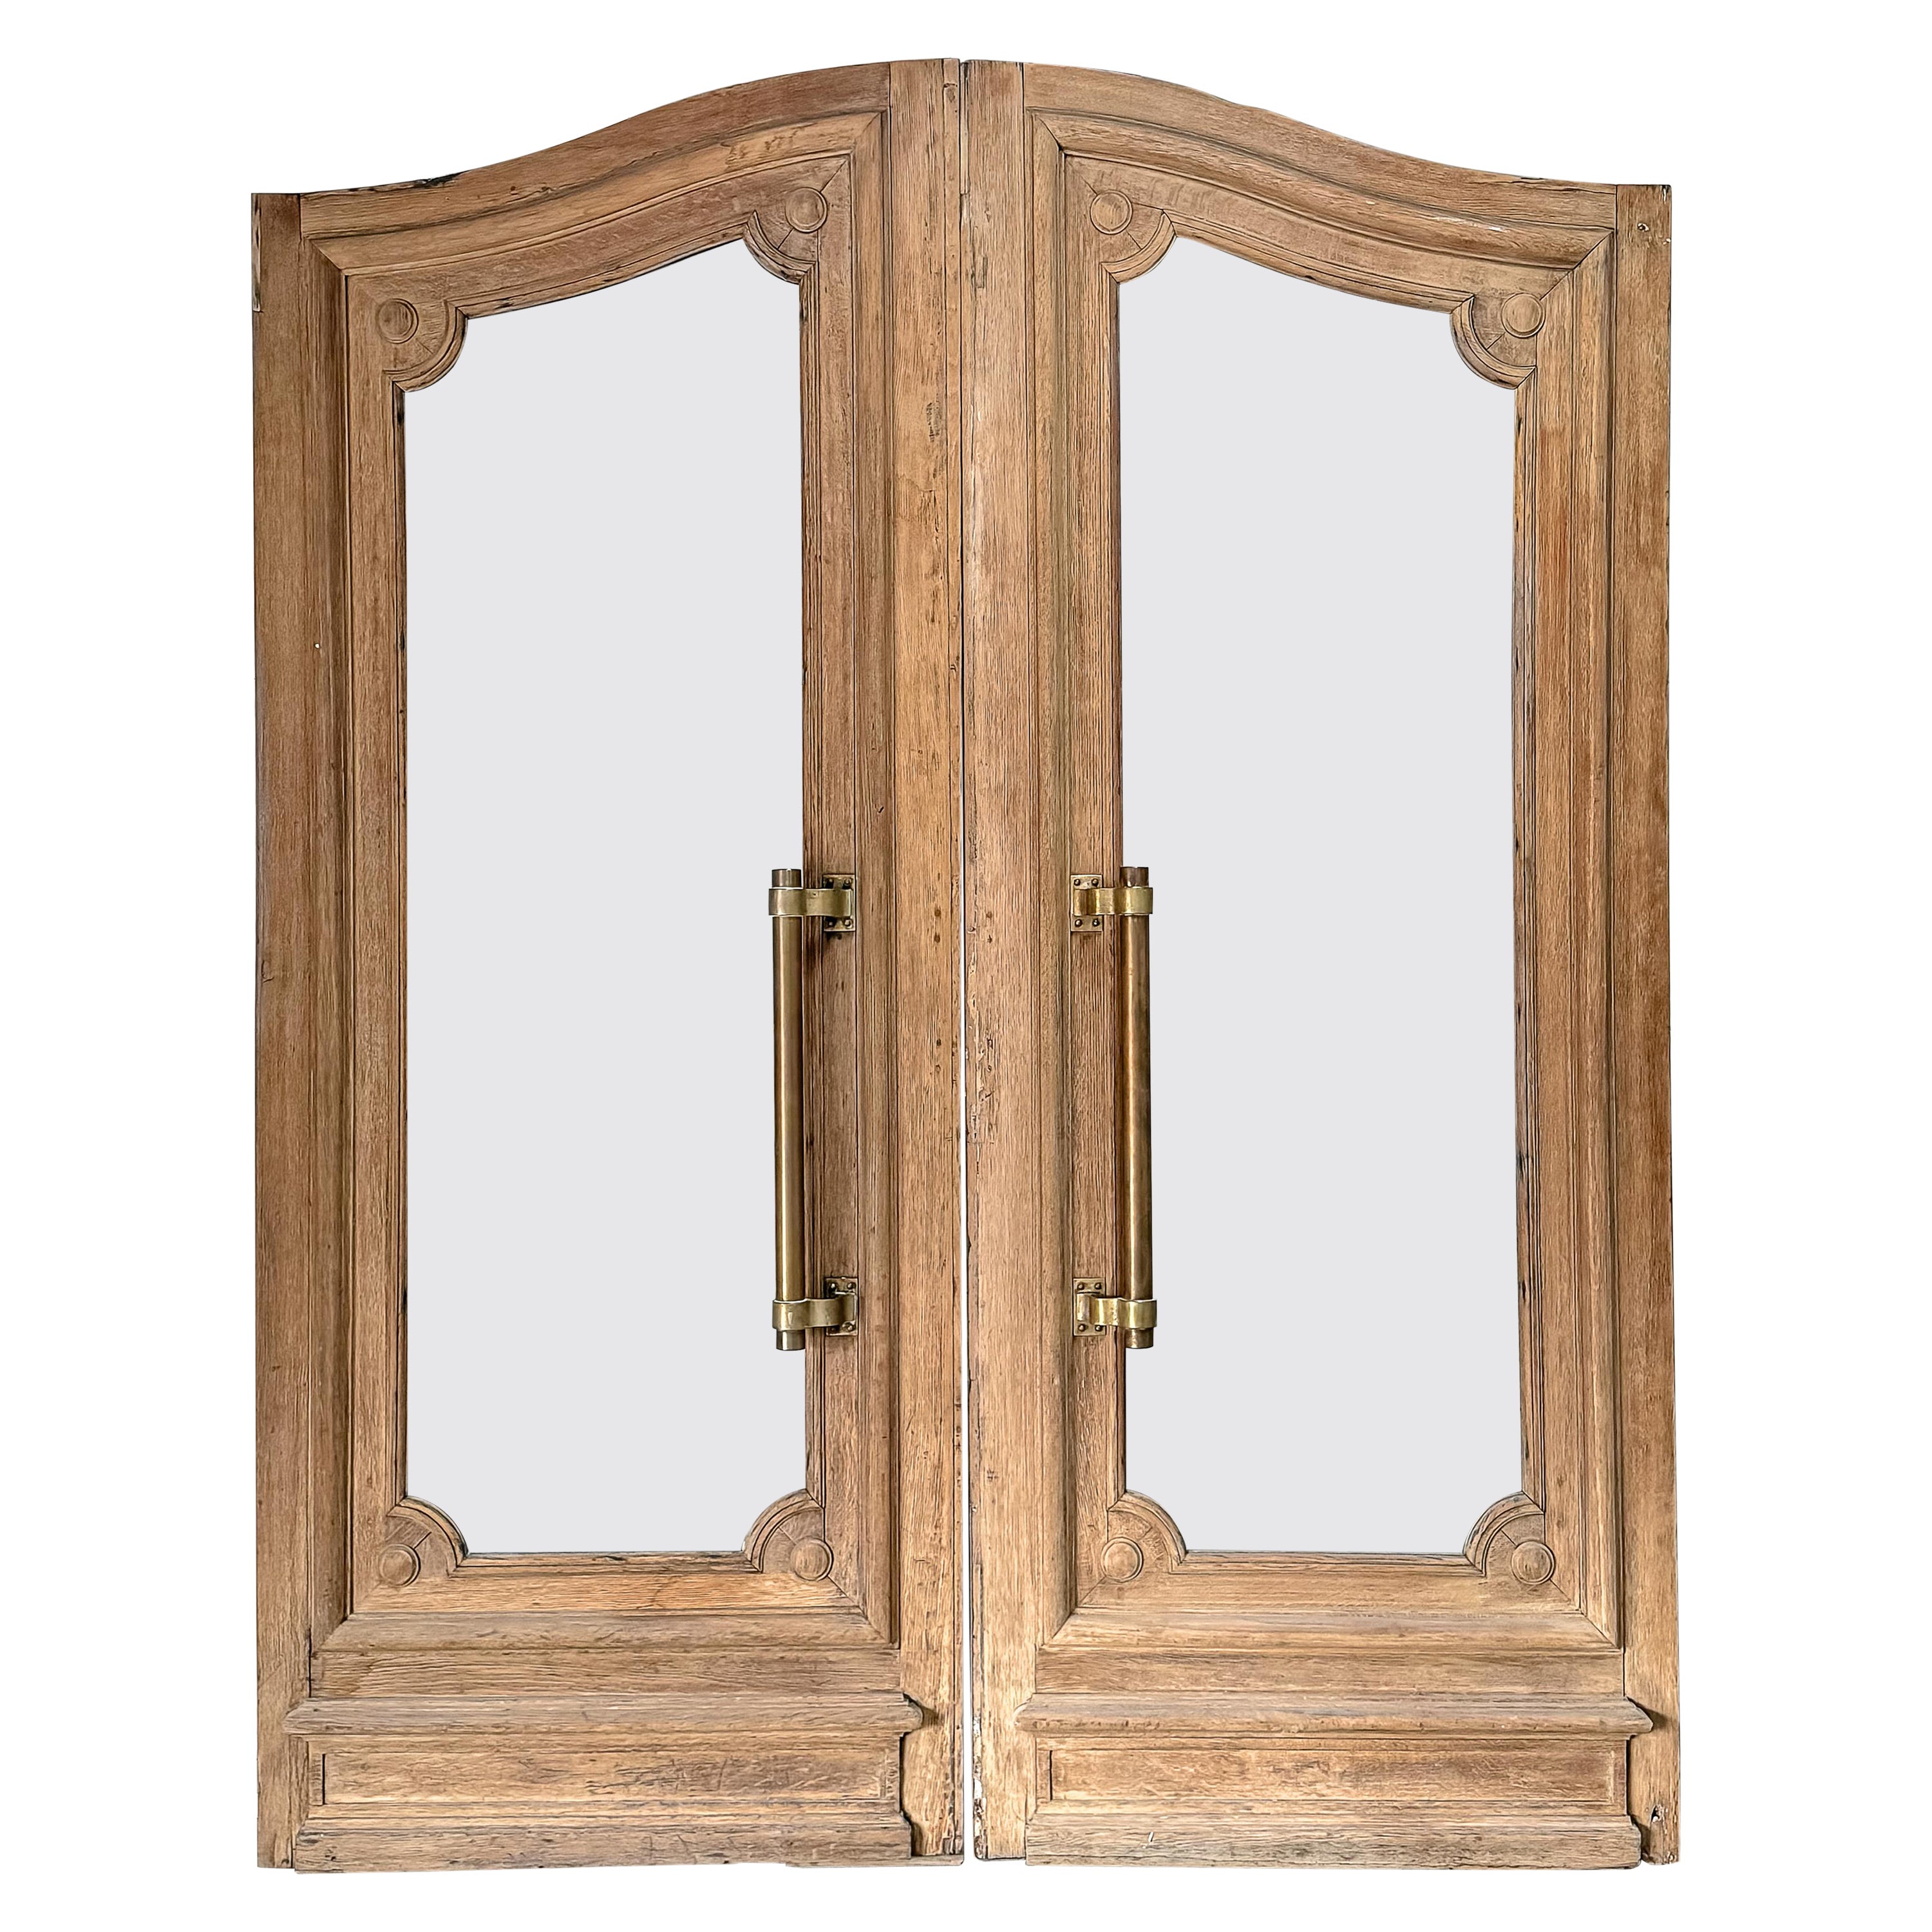 Reclaimed Washed Oak French Exterior Bank Doors For Sale